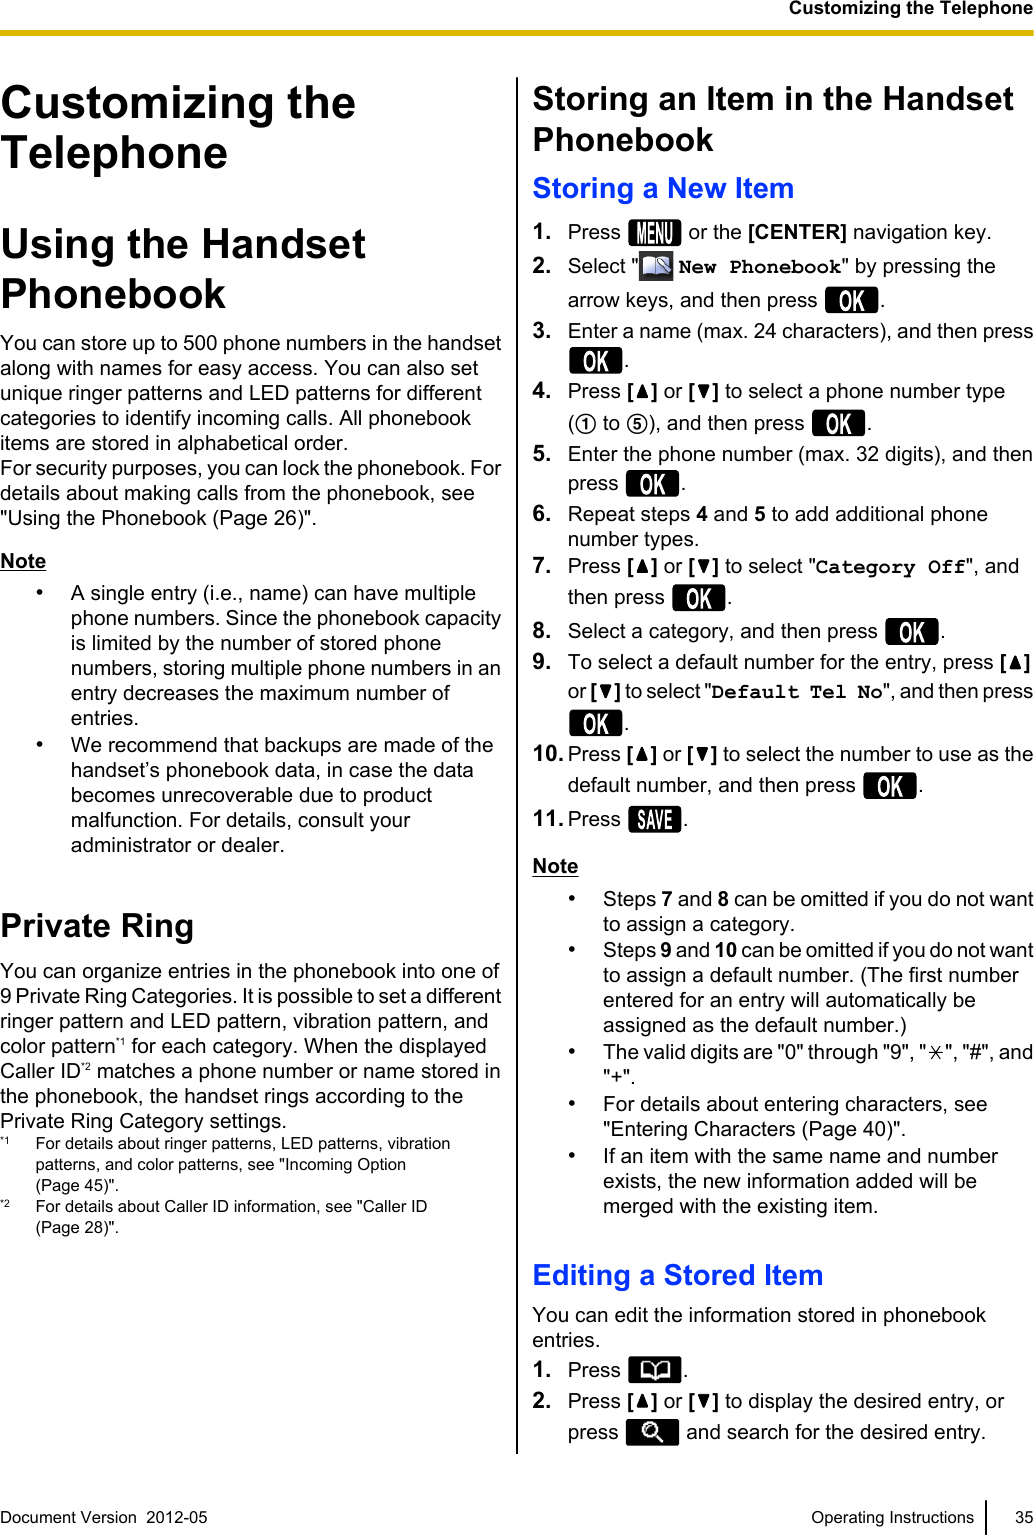 Customizing theTelephoneUsing the HandsetPhonebookYou can store up to 500 phone numbers in the handsetalong with names for easy access. You can also setunique ringer patterns and LED patterns for differentcategories to identify incoming calls. All phonebookitems are stored in alphabetical order.For security purposes, you can lock the phonebook. Fordetails about making calls from the phonebook, see&quot;Using the Phonebook (Page 26)&quot;.Note•A single entry (i.e., name) can have multiplephone numbers. Since the phonebook capacityis limited by the number of stored phonenumbers, storing multiple phone numbers in anentry decreases the maximum number ofentries.•We recommend that backups are made of thehandset’s phonebook data, in case the databecomes unrecoverable due to productmalfunction. For details, consult youradministrator or dealer.Private RingYou can organize entries in the phonebook into one of9 Private Ring Categories. It is possible to set a differentringer pattern and LED pattern, vibration pattern, andcolor pattern*1 for each category. When the displayedCaller ID*2 matches a phone number or name stored inthe phonebook, the handset rings according to thePrivate Ring Category settings.*1 For details about ringer patterns, LED patterns, vibrationpatterns, and color patterns, see &quot;Incoming Option(Page 45)&quot;.*2 For details about Caller ID information, see &quot;Caller ID(Page 28)&quot;.Storing an Item in the HandsetPhonebookStoring a New Item1. Press   or the [CENTER] navigation key.2. Select &quot;  New Phonebook&quot; by pressing thearrow keys, and then press  .3. Enter a name (max. 24 characters), and then press.4. Press [ ] or [ ] to select a phone number type(A to E), and then press  .5. Enter the phone number (max. 32 digits), and thenpress  .6. Repeat steps 4 and 5 to add additional phonenumber types.7. Press [ ] or [ ] to select &quot;Category Off&quot;, andthen press  .8. Select a category, and then press  .9. To select a default number for the entry, press []or [ ] to select &quot;Default Tel No&quot;, and then press.10. Press [] or [] to select the number to use as thedefault number, and then press  .11. Press  .Note•Steps 7 and 8 can be omitted if you do not wantto assign a category.•Steps 9 and 10 can be omitted if you do not wantto assign a default number. (The first numberentered for an entry will automatically beassigned as the default number.)•The valid digits are &quot;0&quot; through &quot;9&quot;, &quot; &quot;, &quot;#&quot;, and&quot;+&quot;.•For details about entering characters, see&quot;Entering Characters (Page 40)&quot;.•If an item with the same name and numberexists, the new information added will bemerged with the existing item.Editing a Stored ItemYou can edit the information stored in phonebookentries.1. Press  .2. Press [ ] or [ ] to display the desired entry, orpress   and search for the desired entry.Document Version  2012-05   Operating Instructions 35Customizing the Telephone